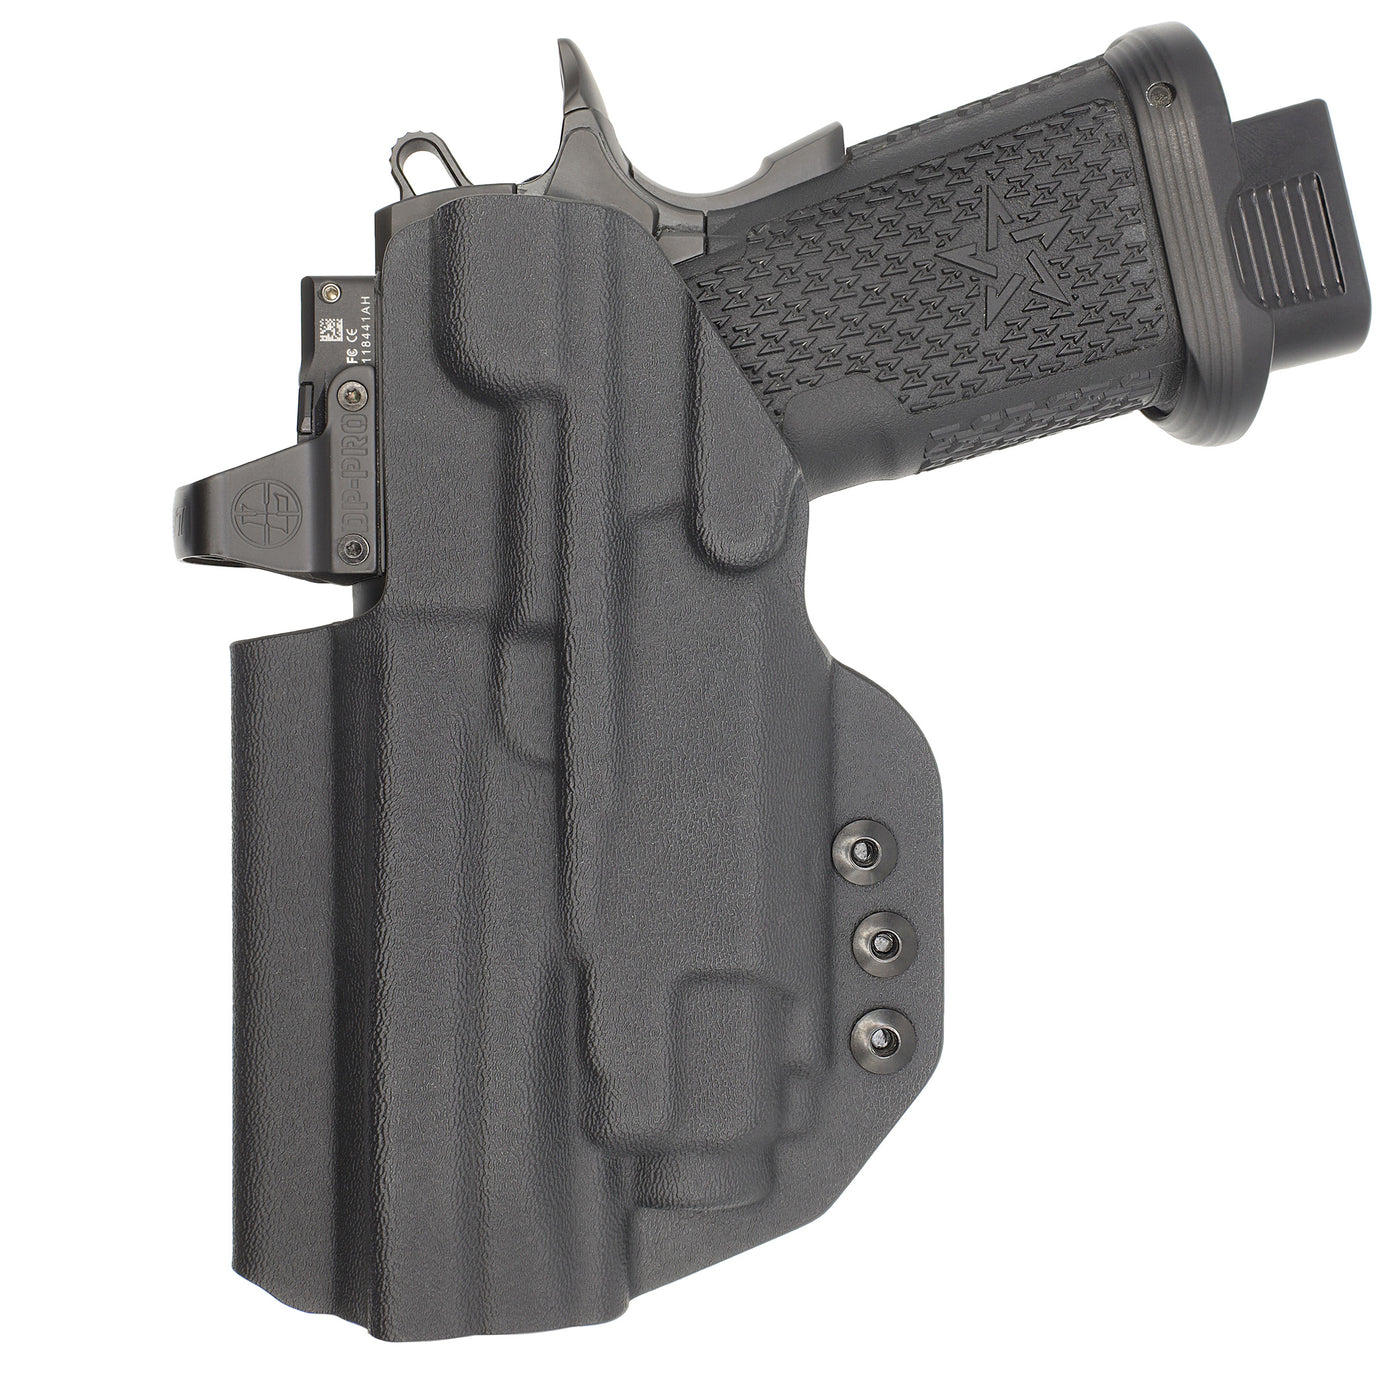 C&G Holsters quickship IWB Tactical 1911 streamlight TLR8 holstered back view